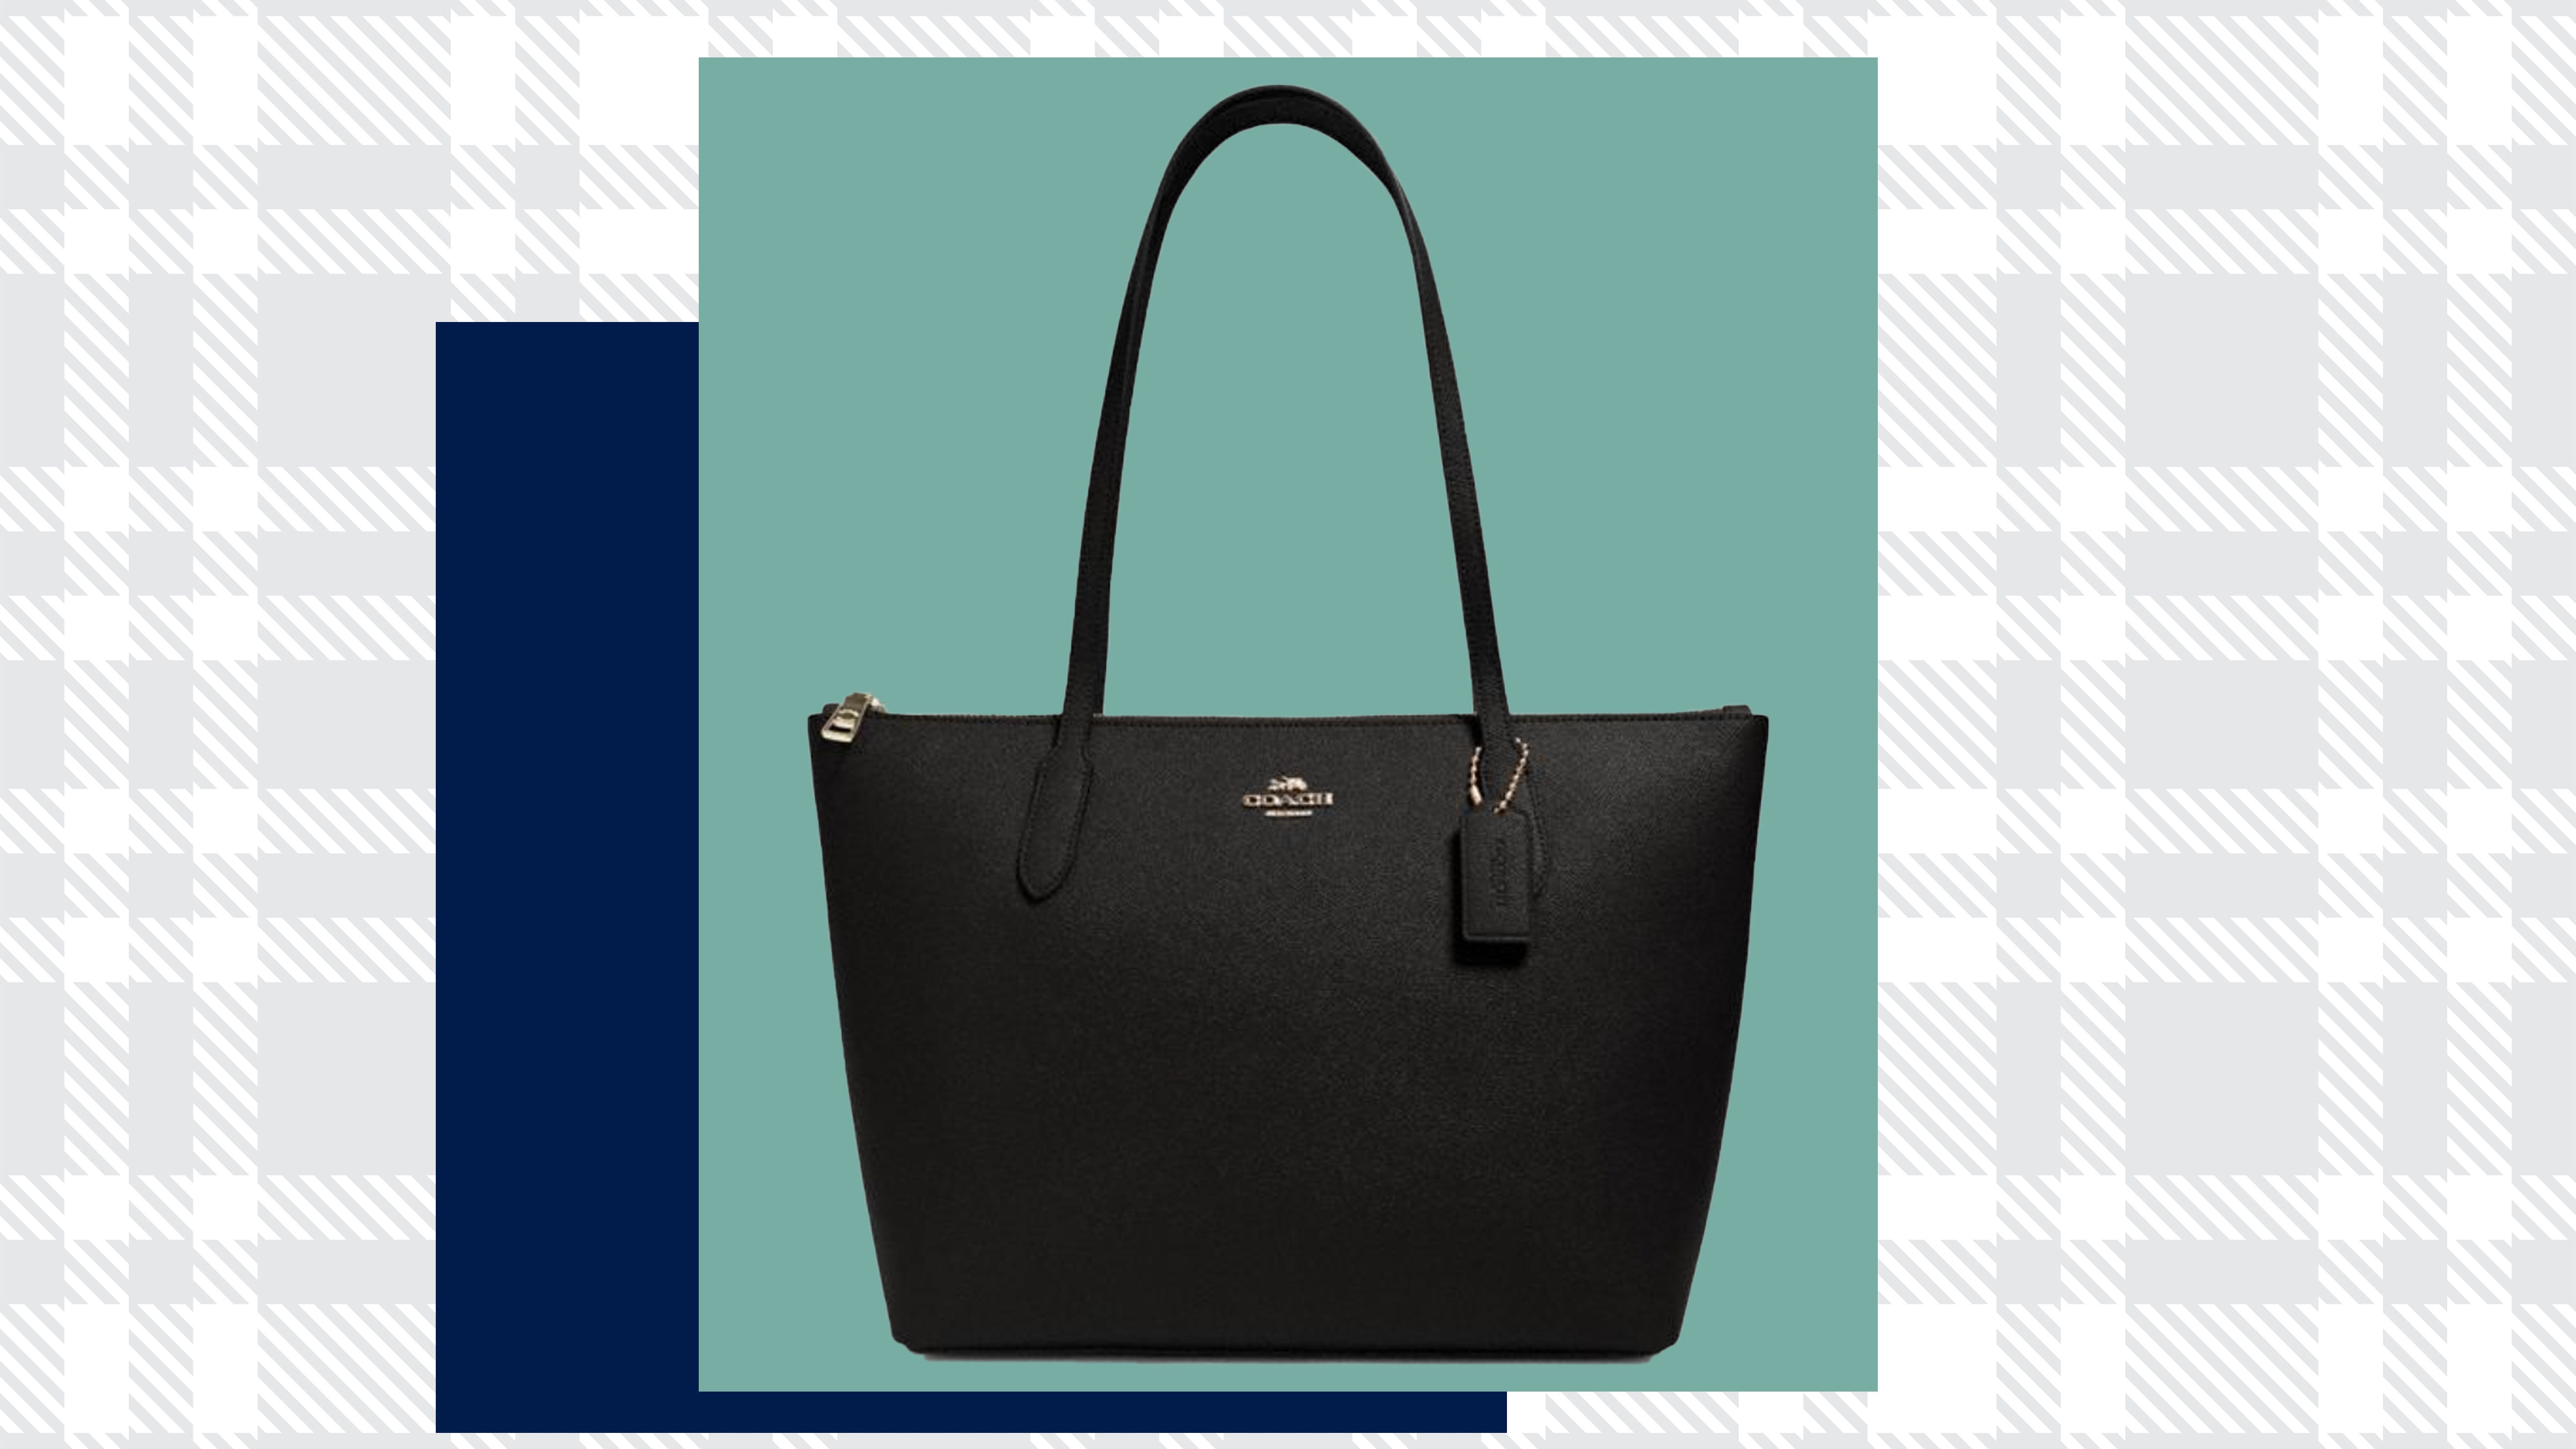 Coach Outlet: Use this promo code to save even more on leather bags